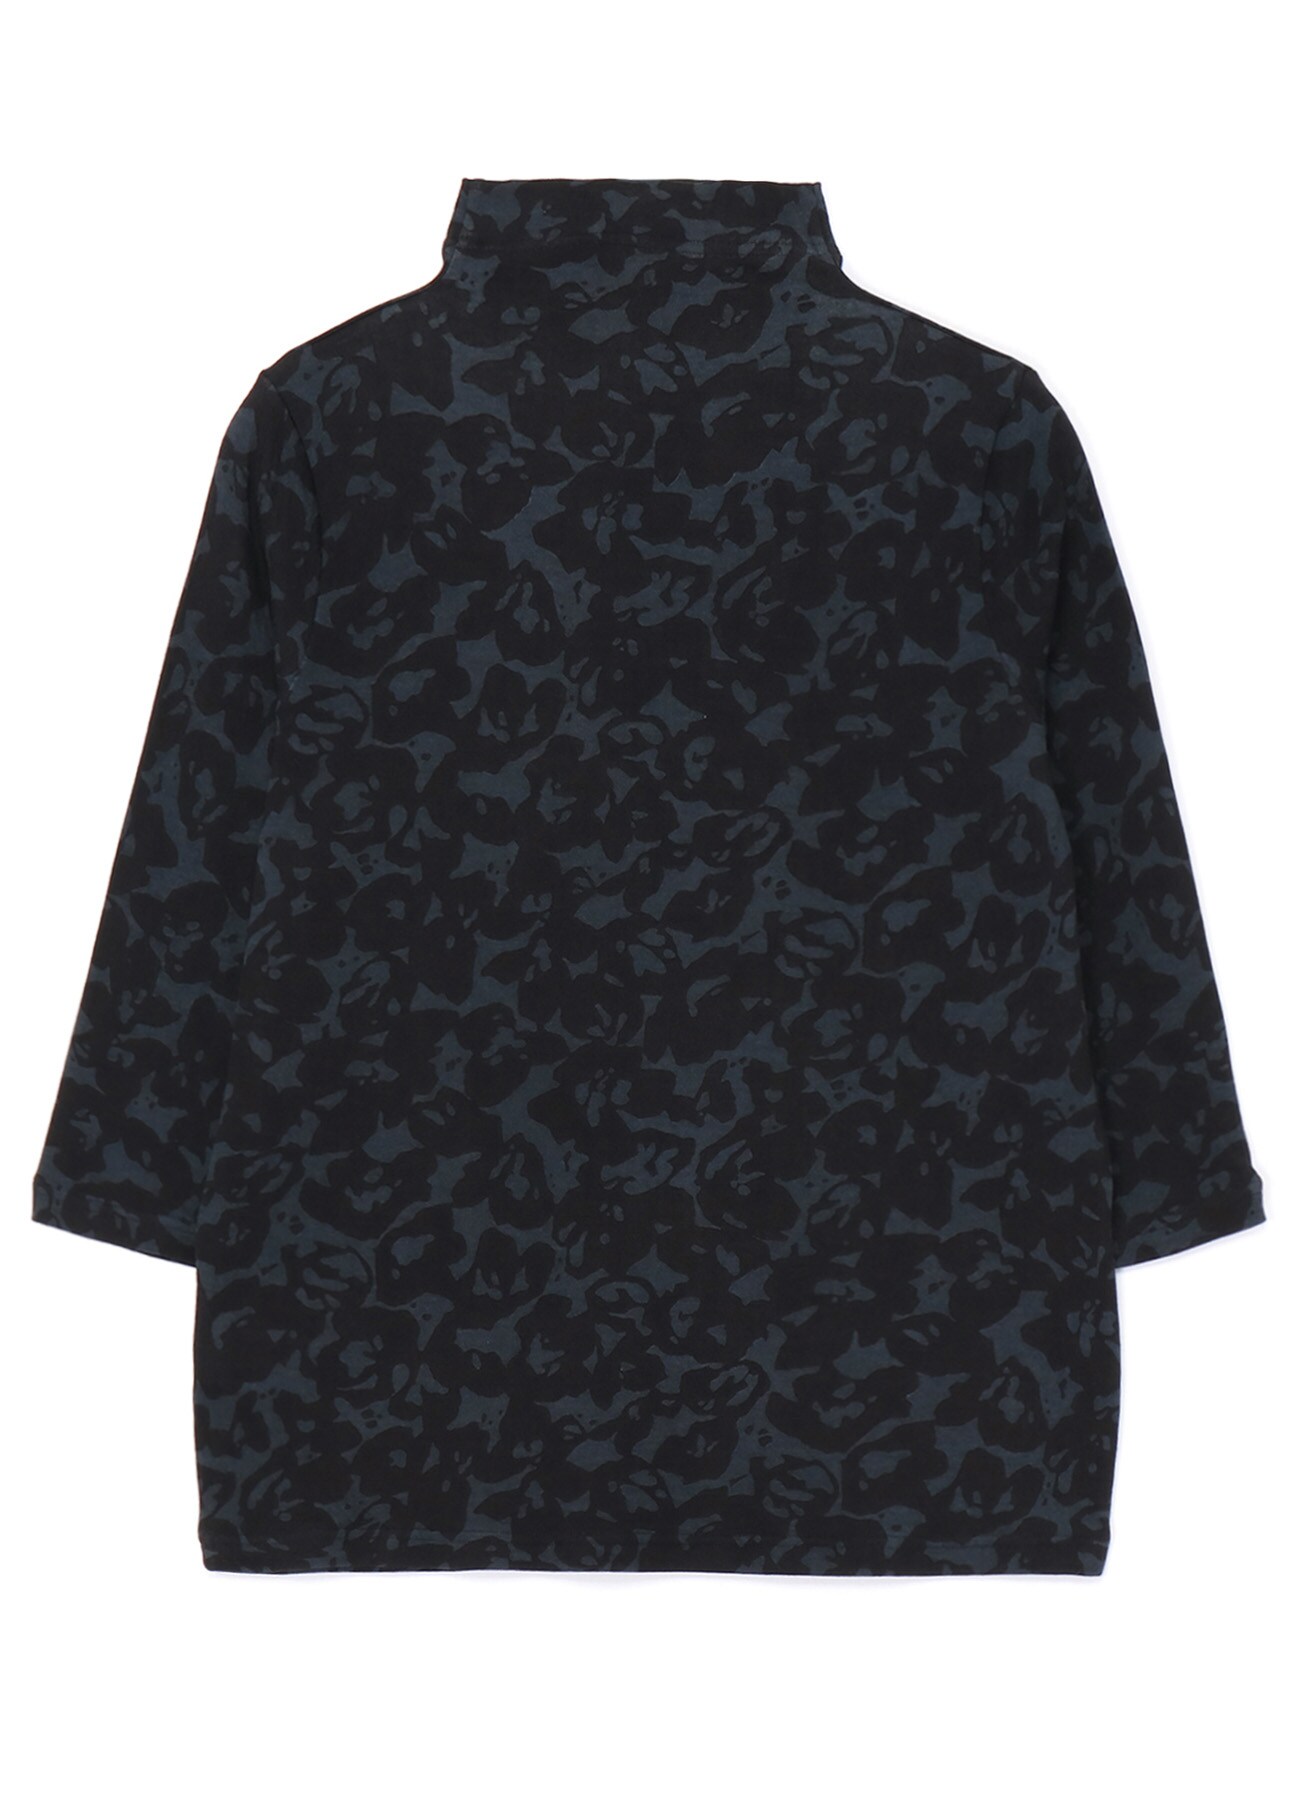 80/1 DUAL-LAYER JERSEY PRINTED TURTLENECK WITH 3/4 LENGTH SLEEVES